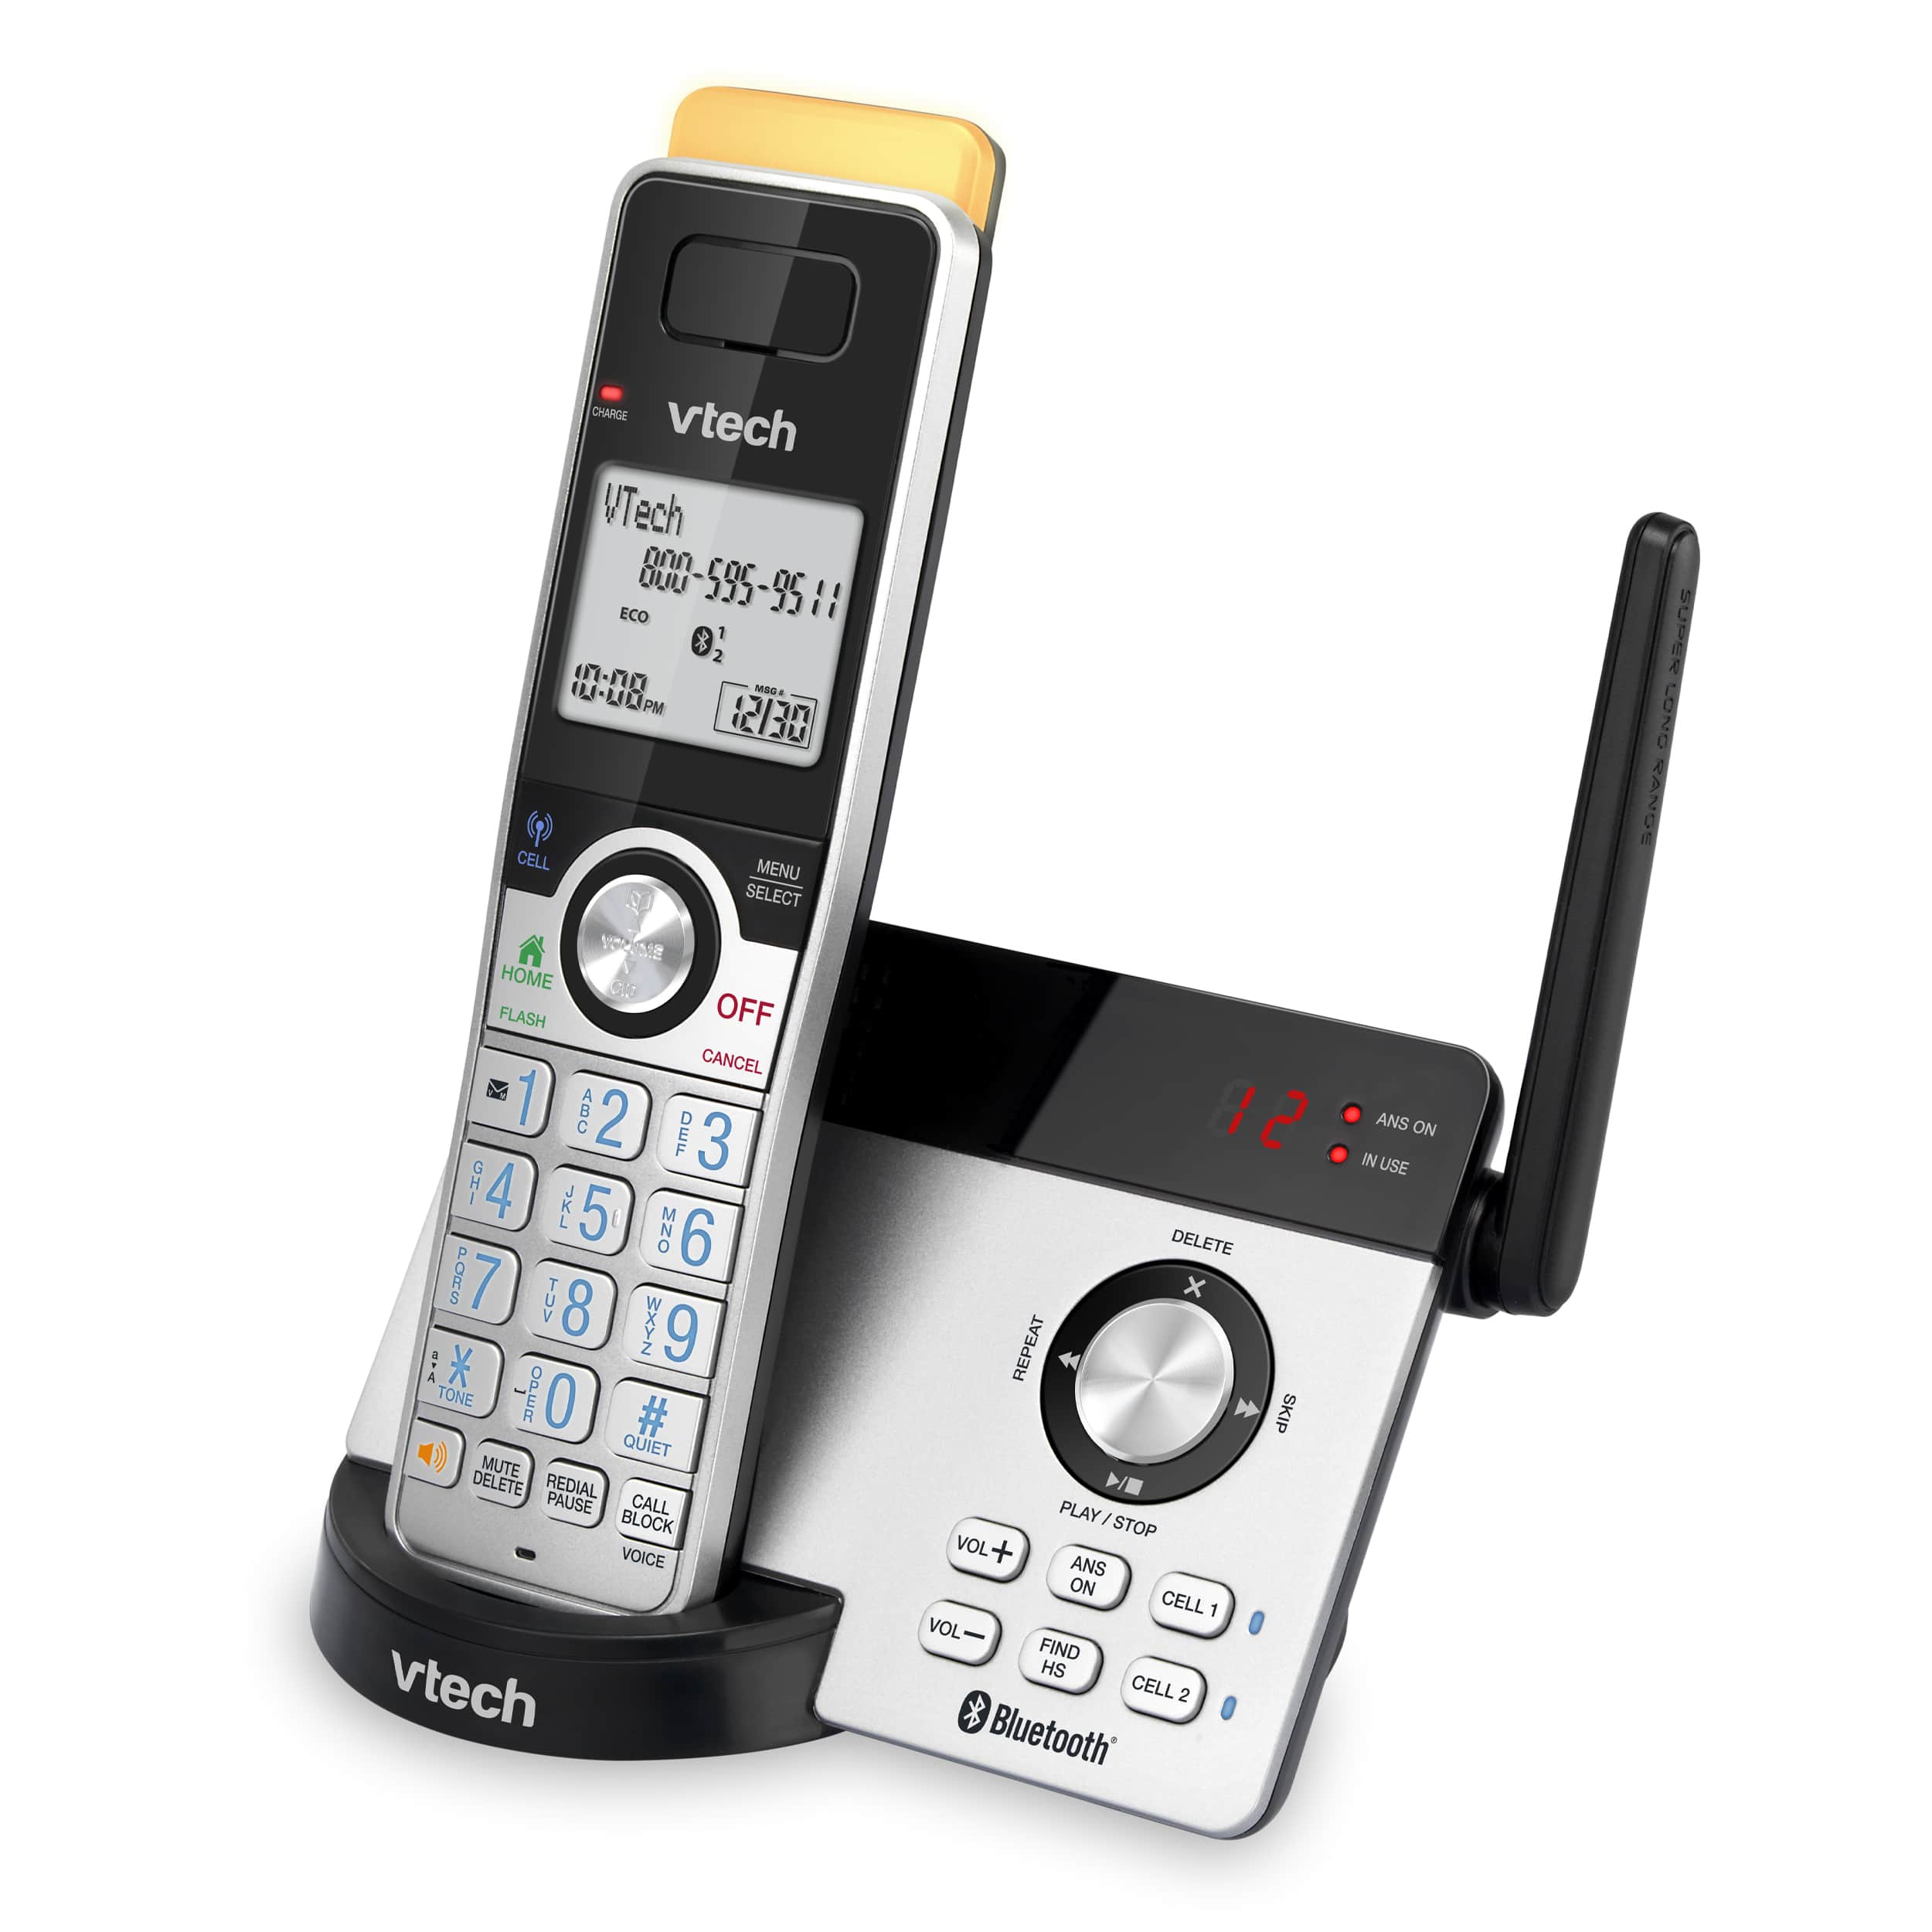 Expandable Cordless Phone with Super Long Range, Bluetooth Connect to Cell, Smart Call Blocker and Answering System - view 2